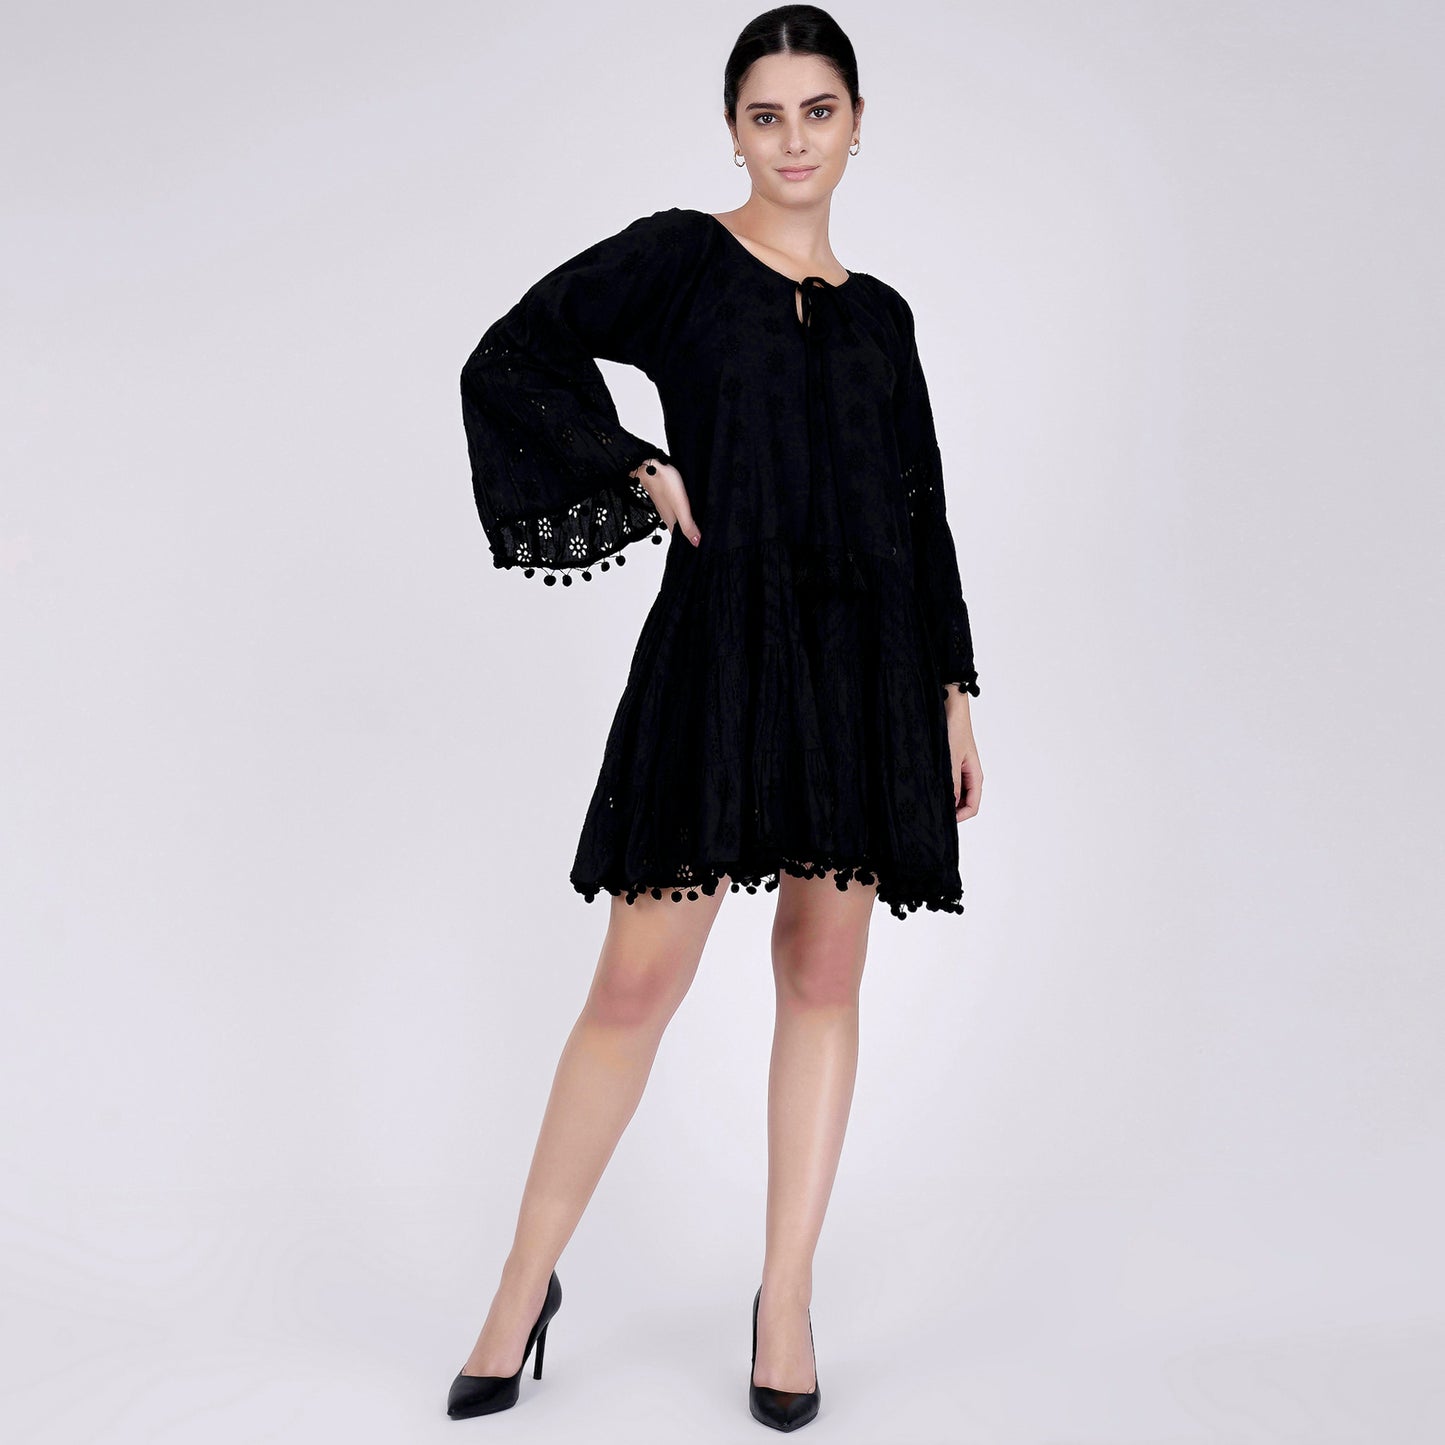 Image of Look stylish and confident while wearing the BLACK EYELET DRESS. Crafted from a high-quality eyelet fabric, this dress exudes a modern silhouette and a luxurious texture. The dress is designed to have a perfect fit, showing off your curves in the best light. Enjoy the quality and the timeless design of the BLACK EYELET DRESS.  From savoirfashions.com